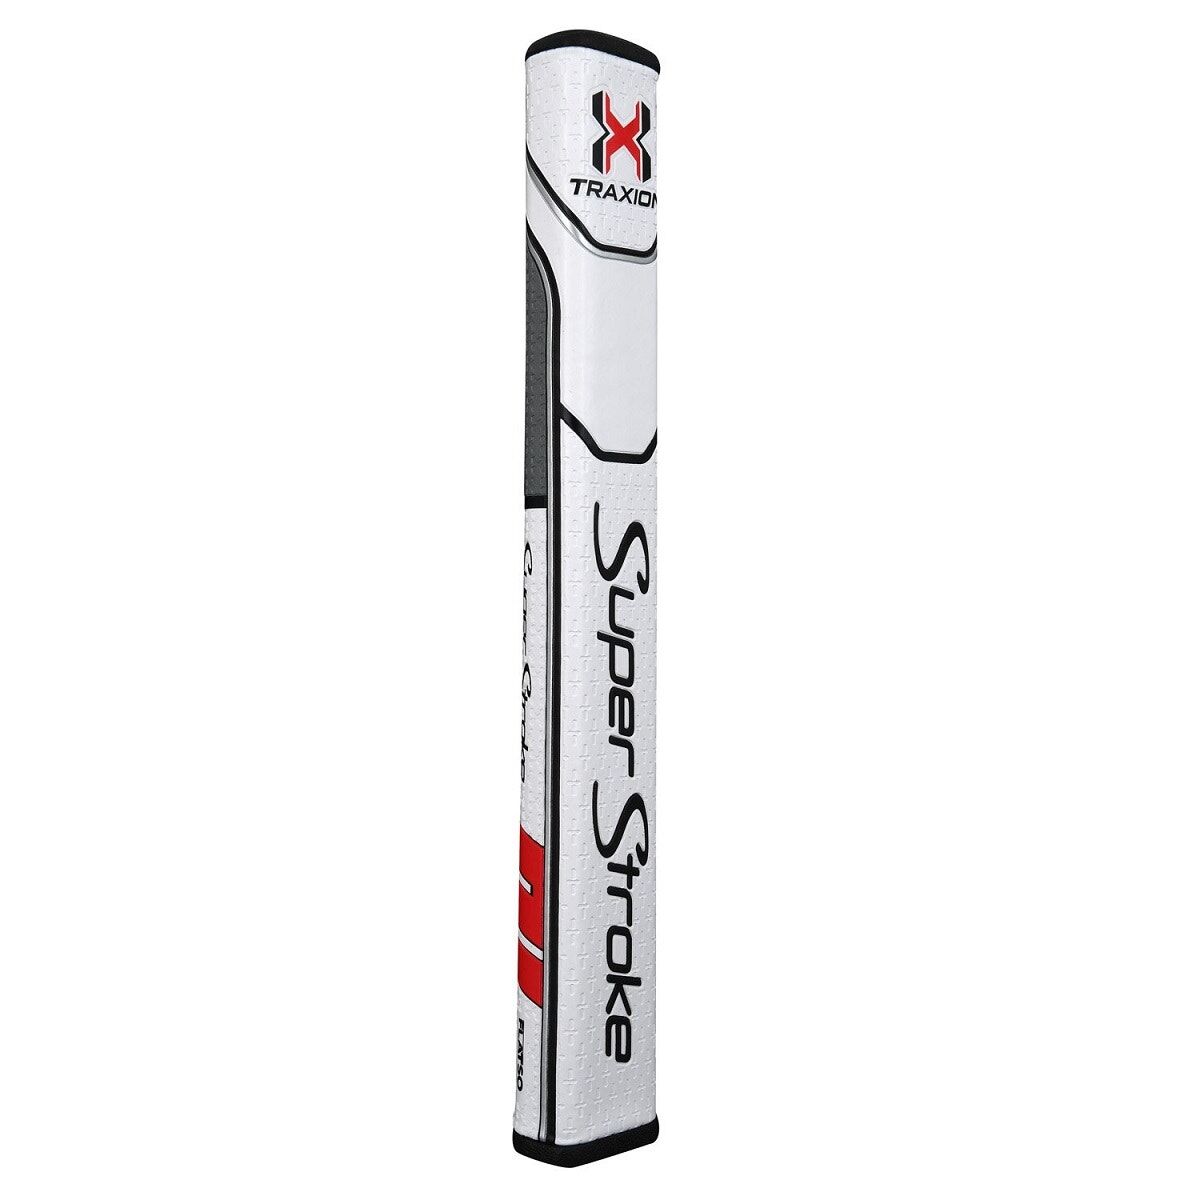 Superstroke Traxion Flatso 3.0 Putter - Non-Tapered 0.580" White/grey/red - Jumbo Golf Grips